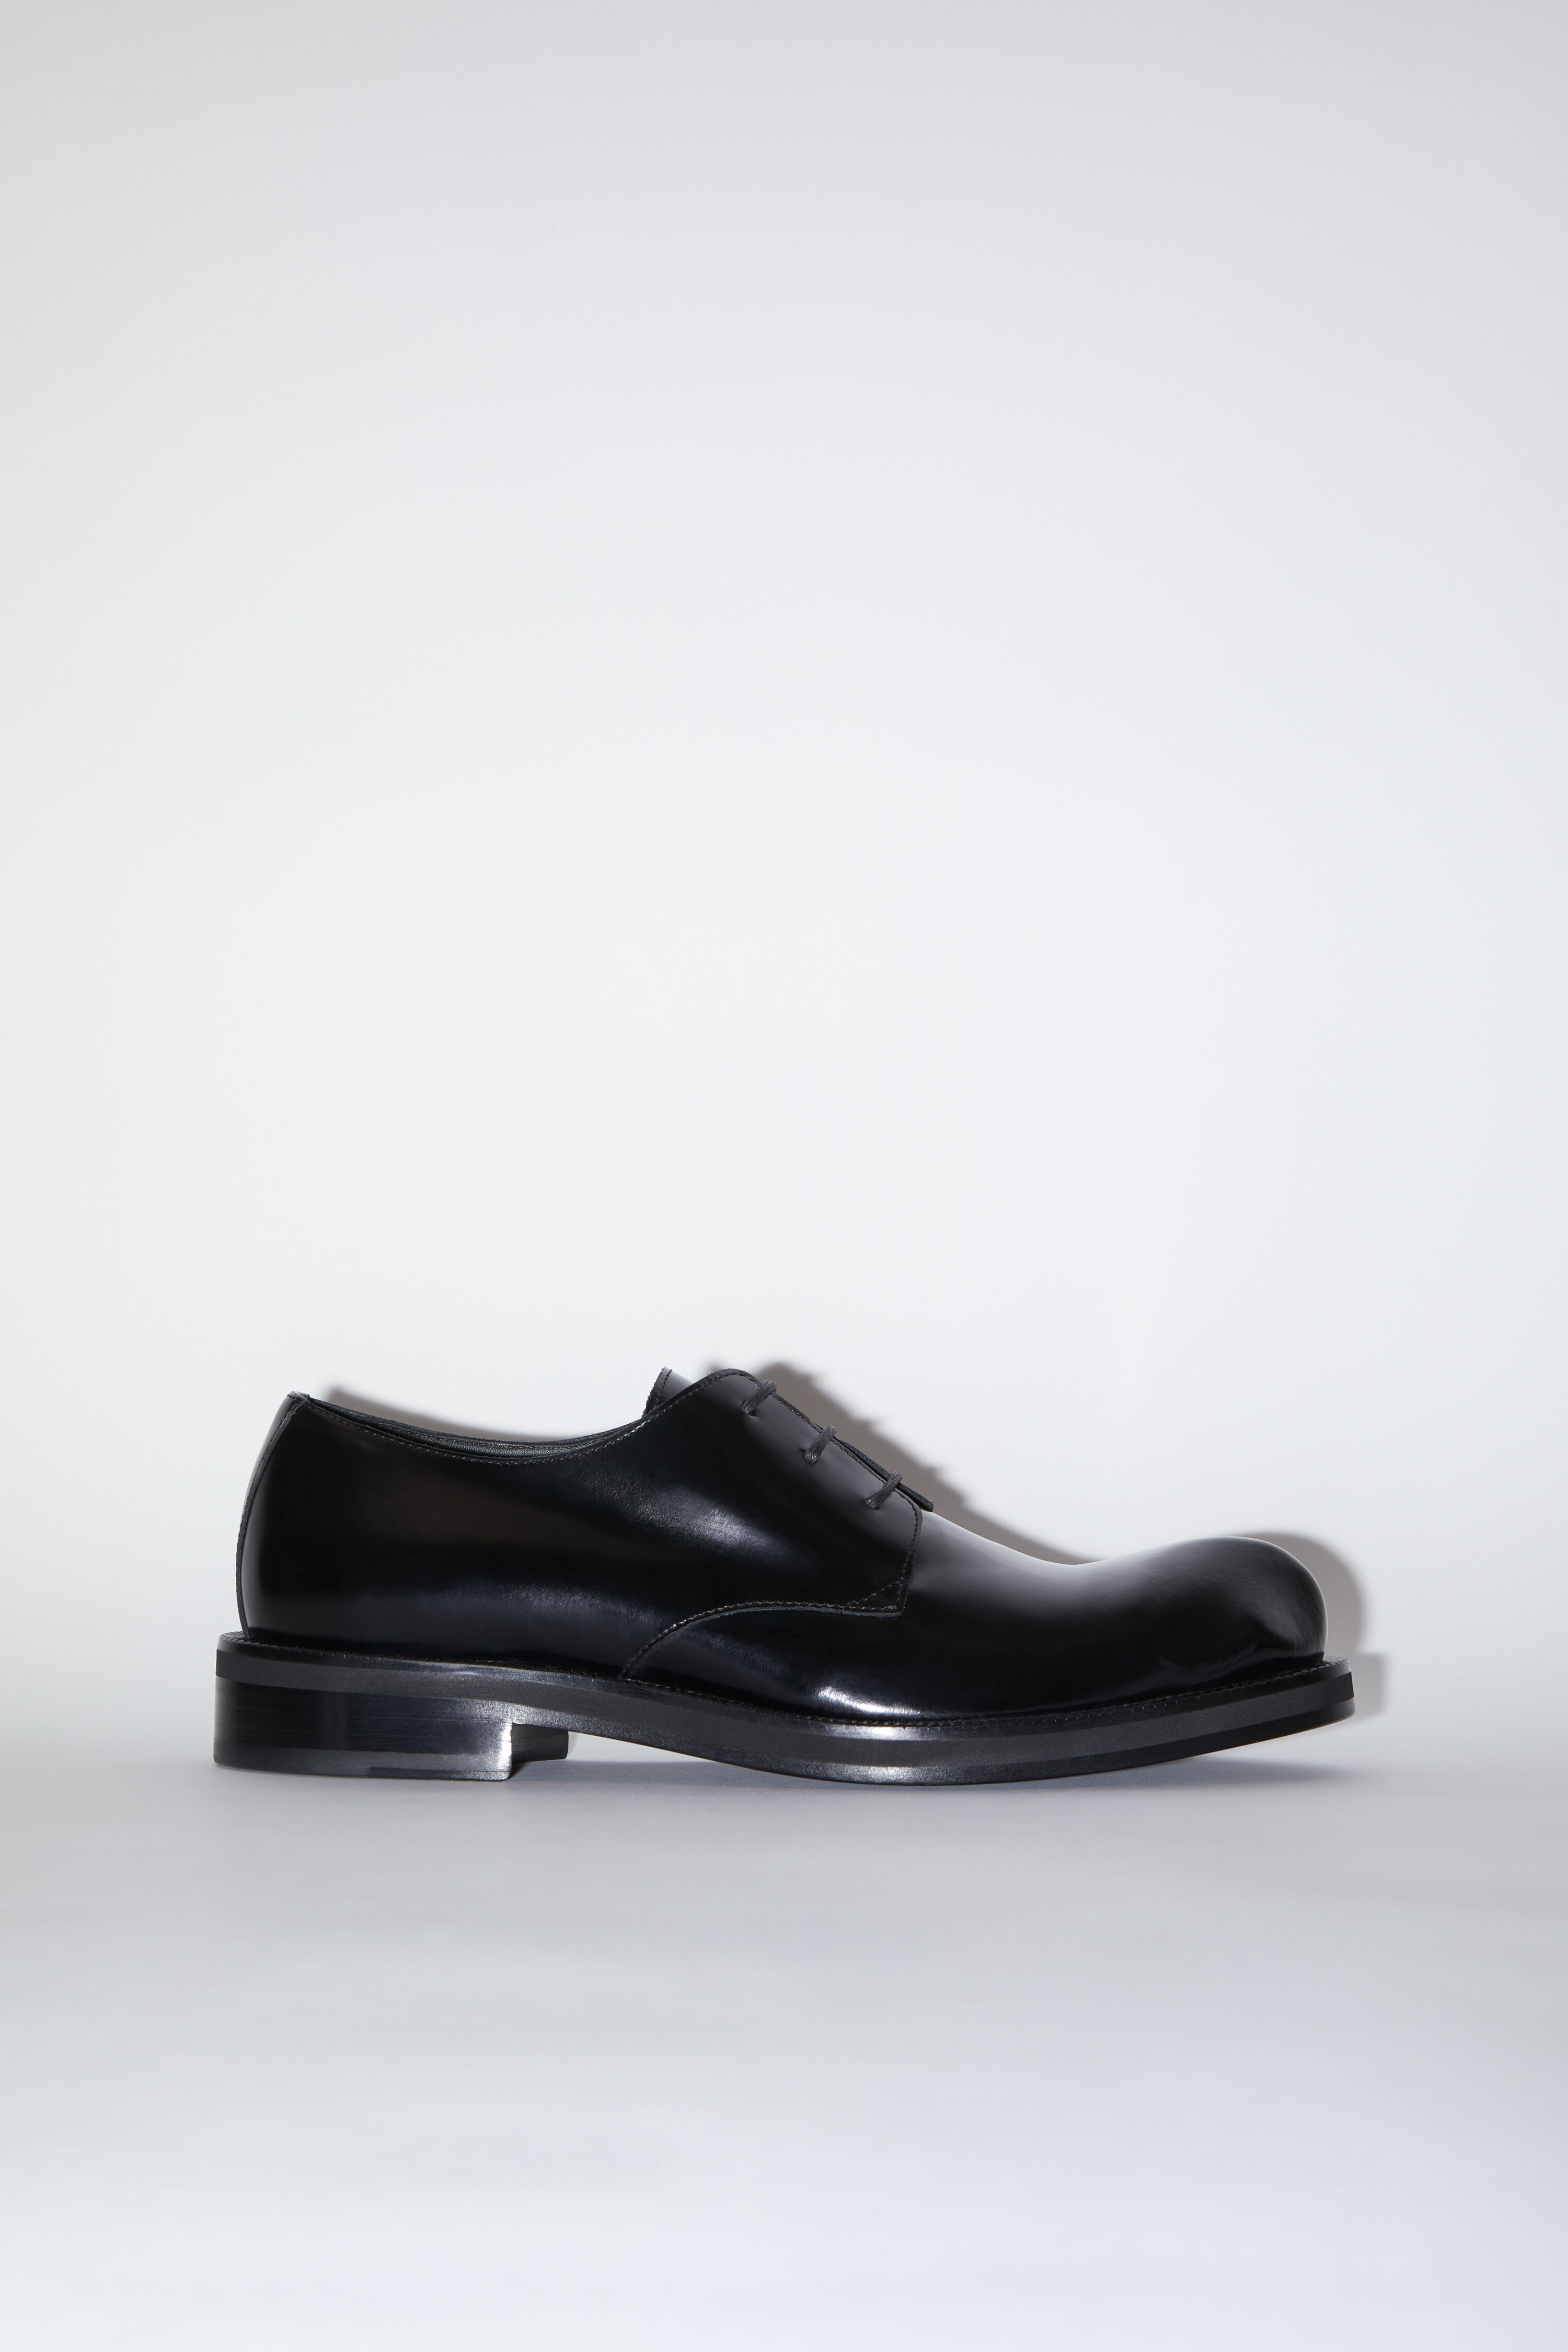 ACNE STUDIOS LEATHER DERBY SHOES 42